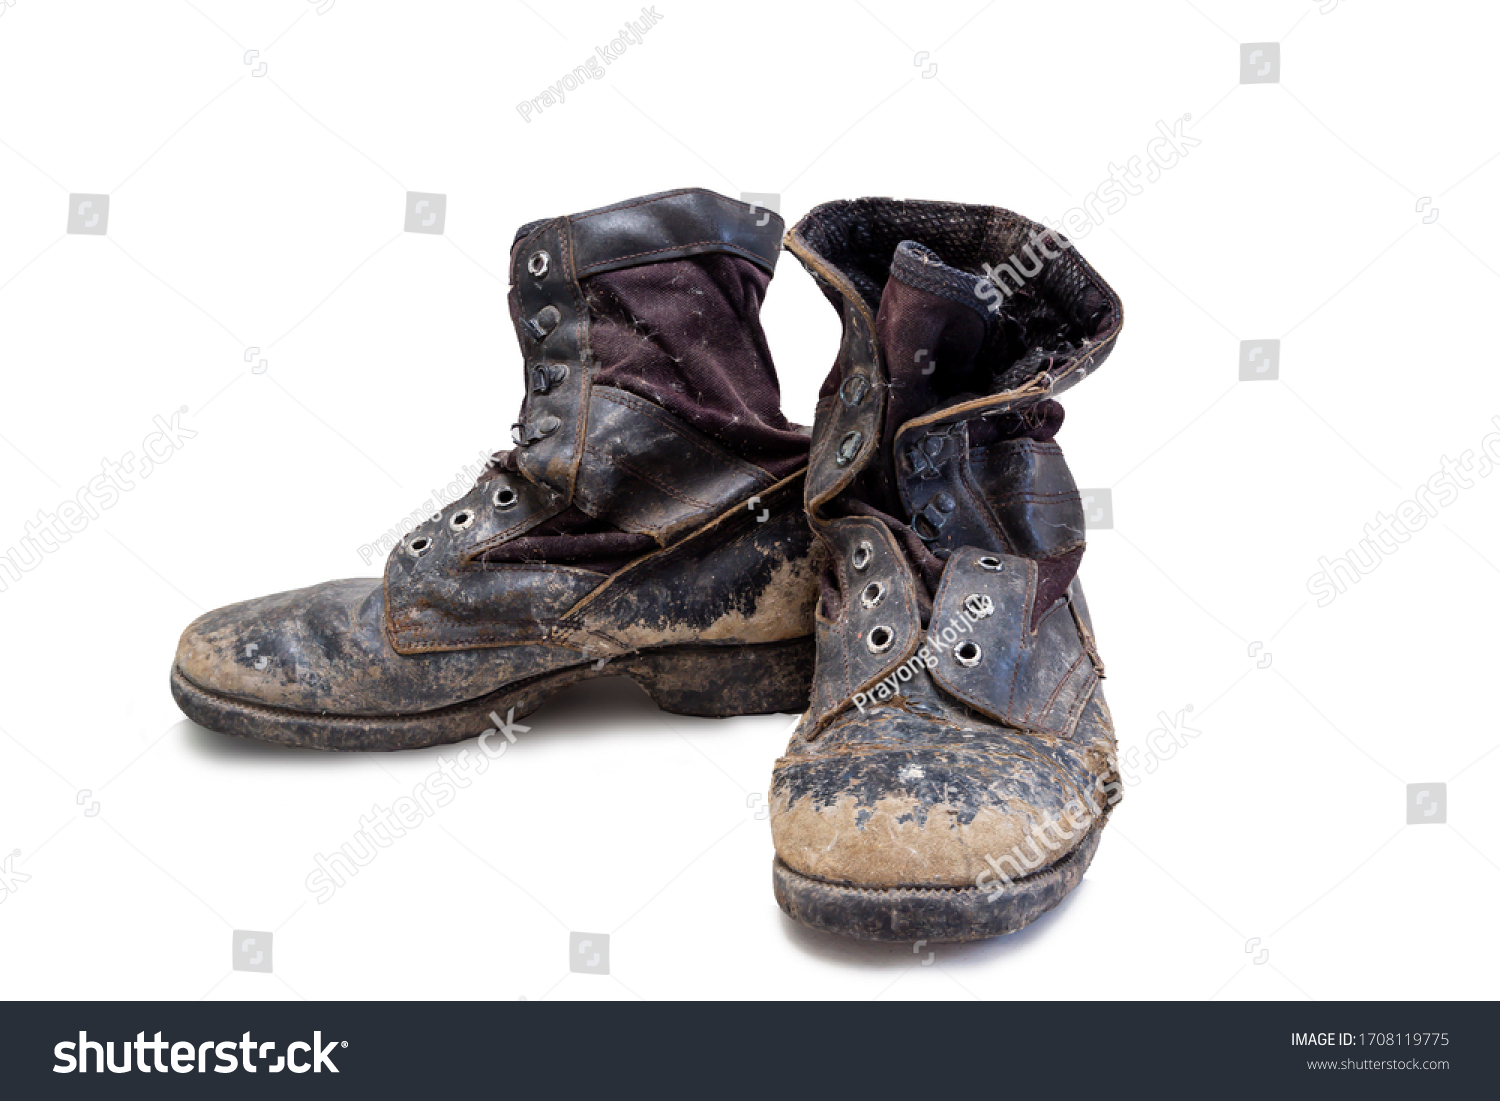 Old Torn Boots Isolated On White Stock Photo 1708119775 | Shutterstock